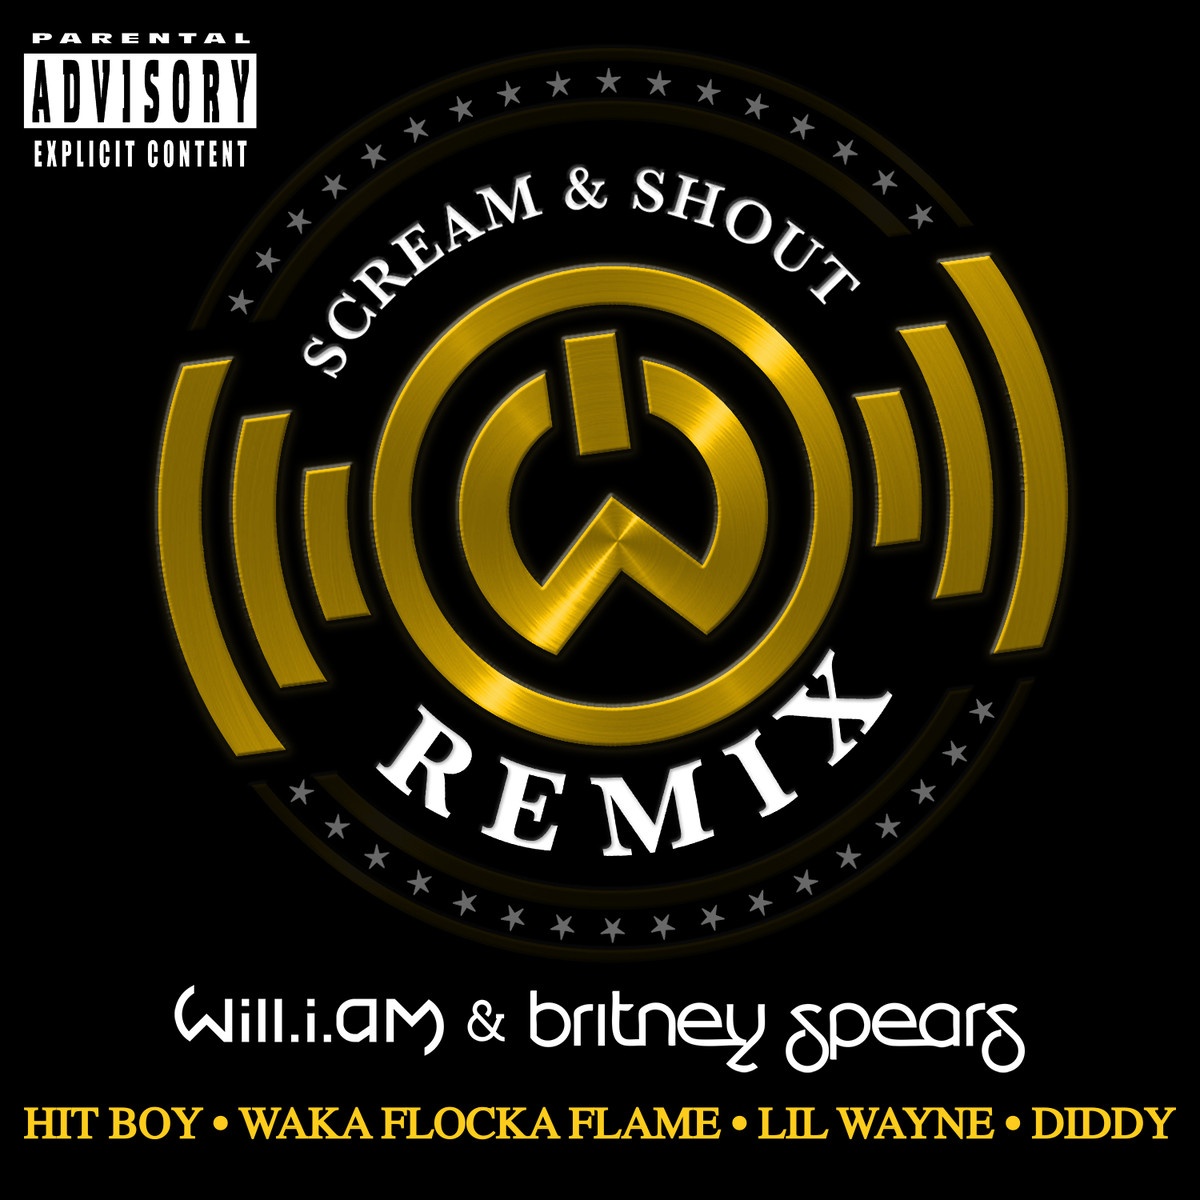 Scream and Shout (featuring Britney Spears) (Clean Version)